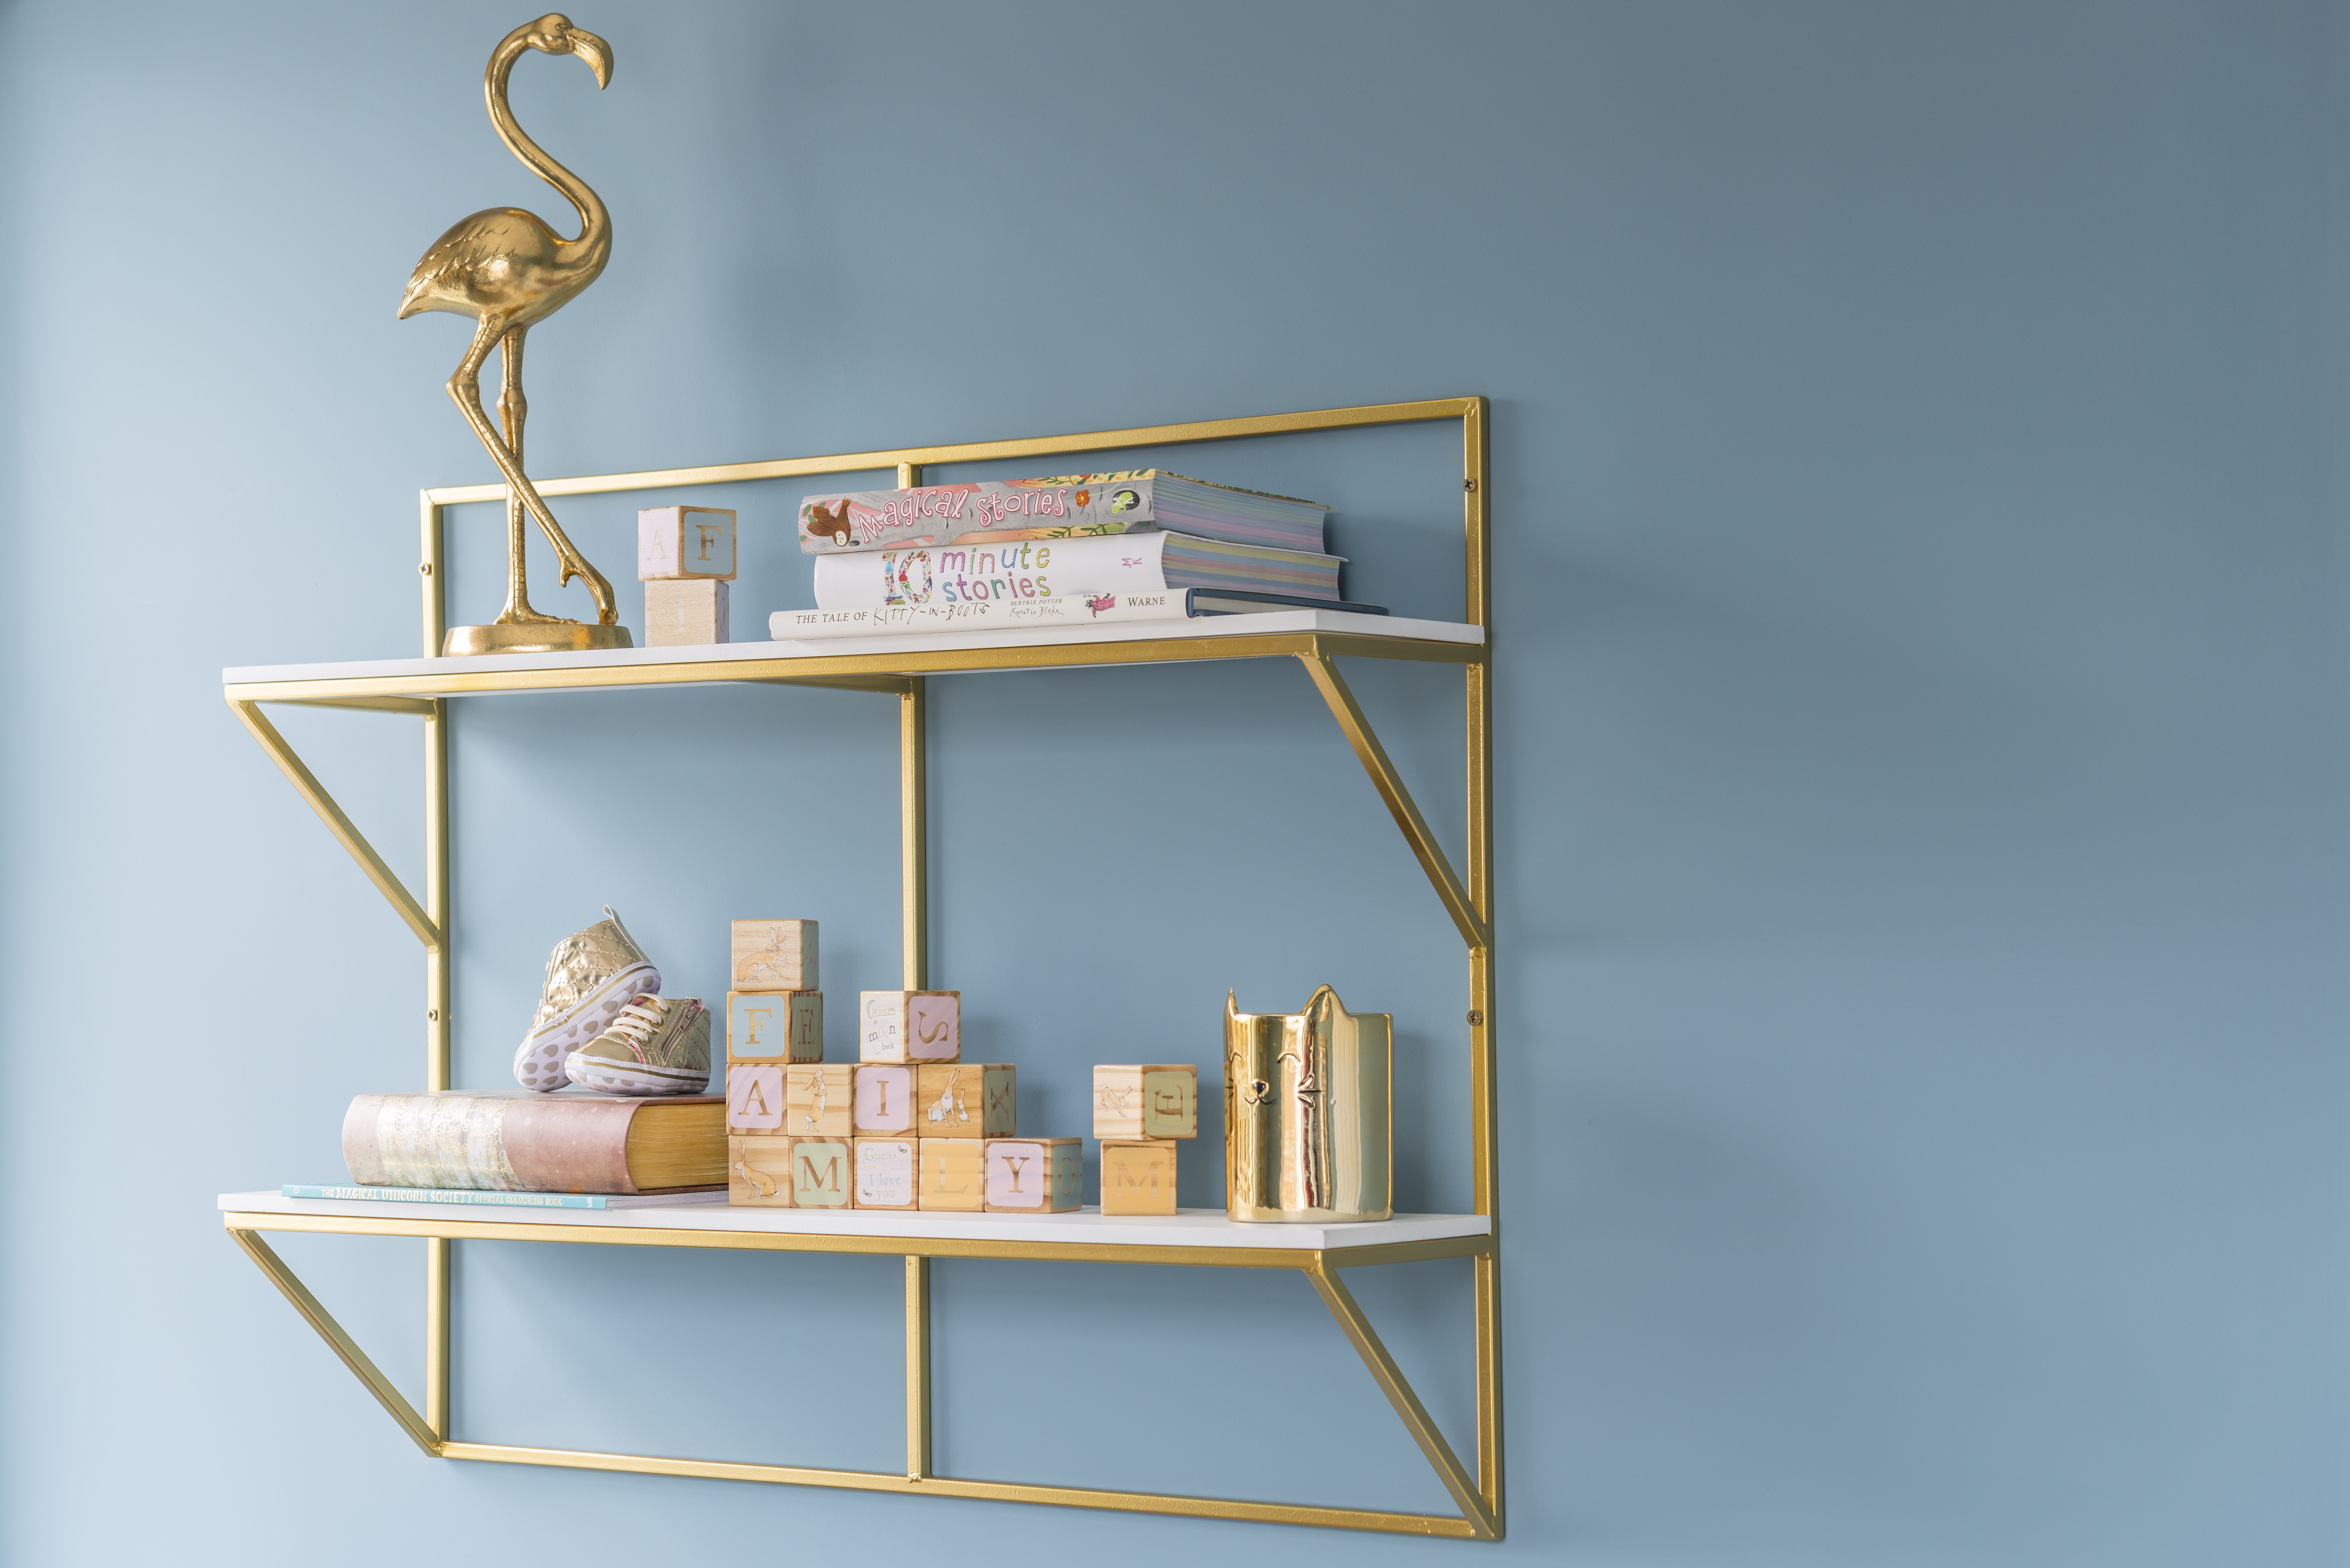 White and gold shelving with children's decorative items, gold flamingo and books